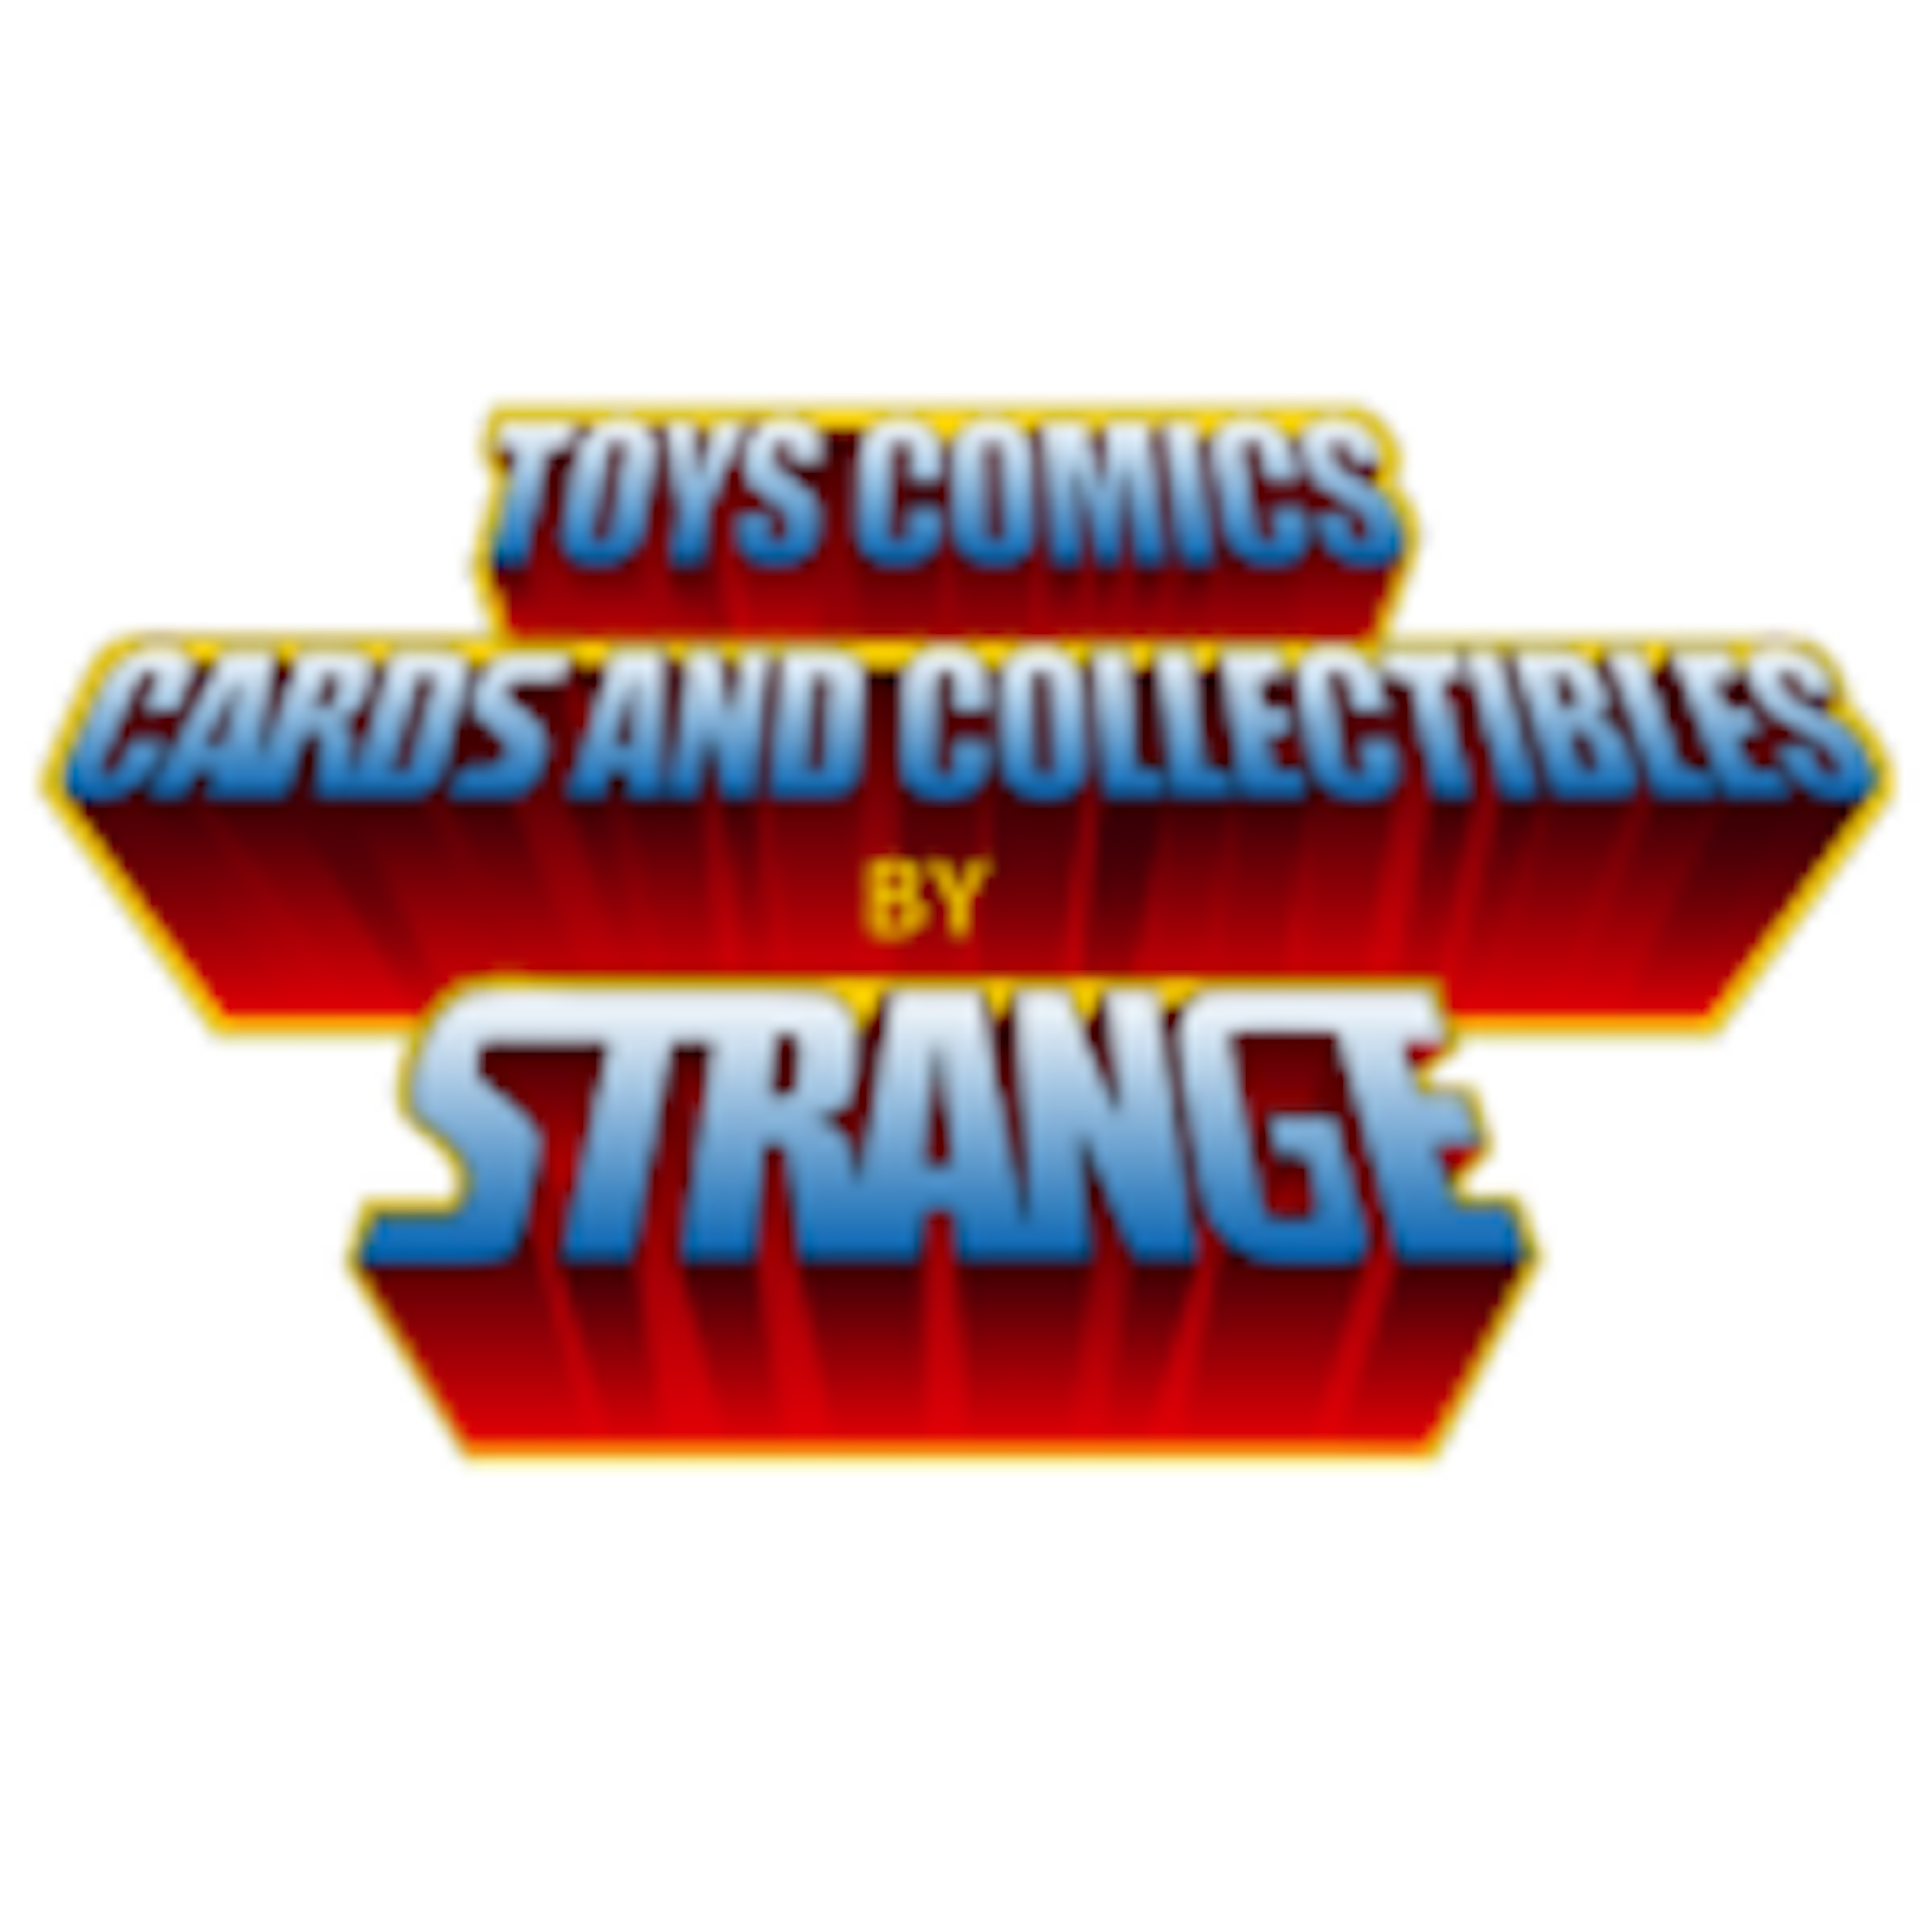 Toys, Comics, Cards and Collectibles by Strange